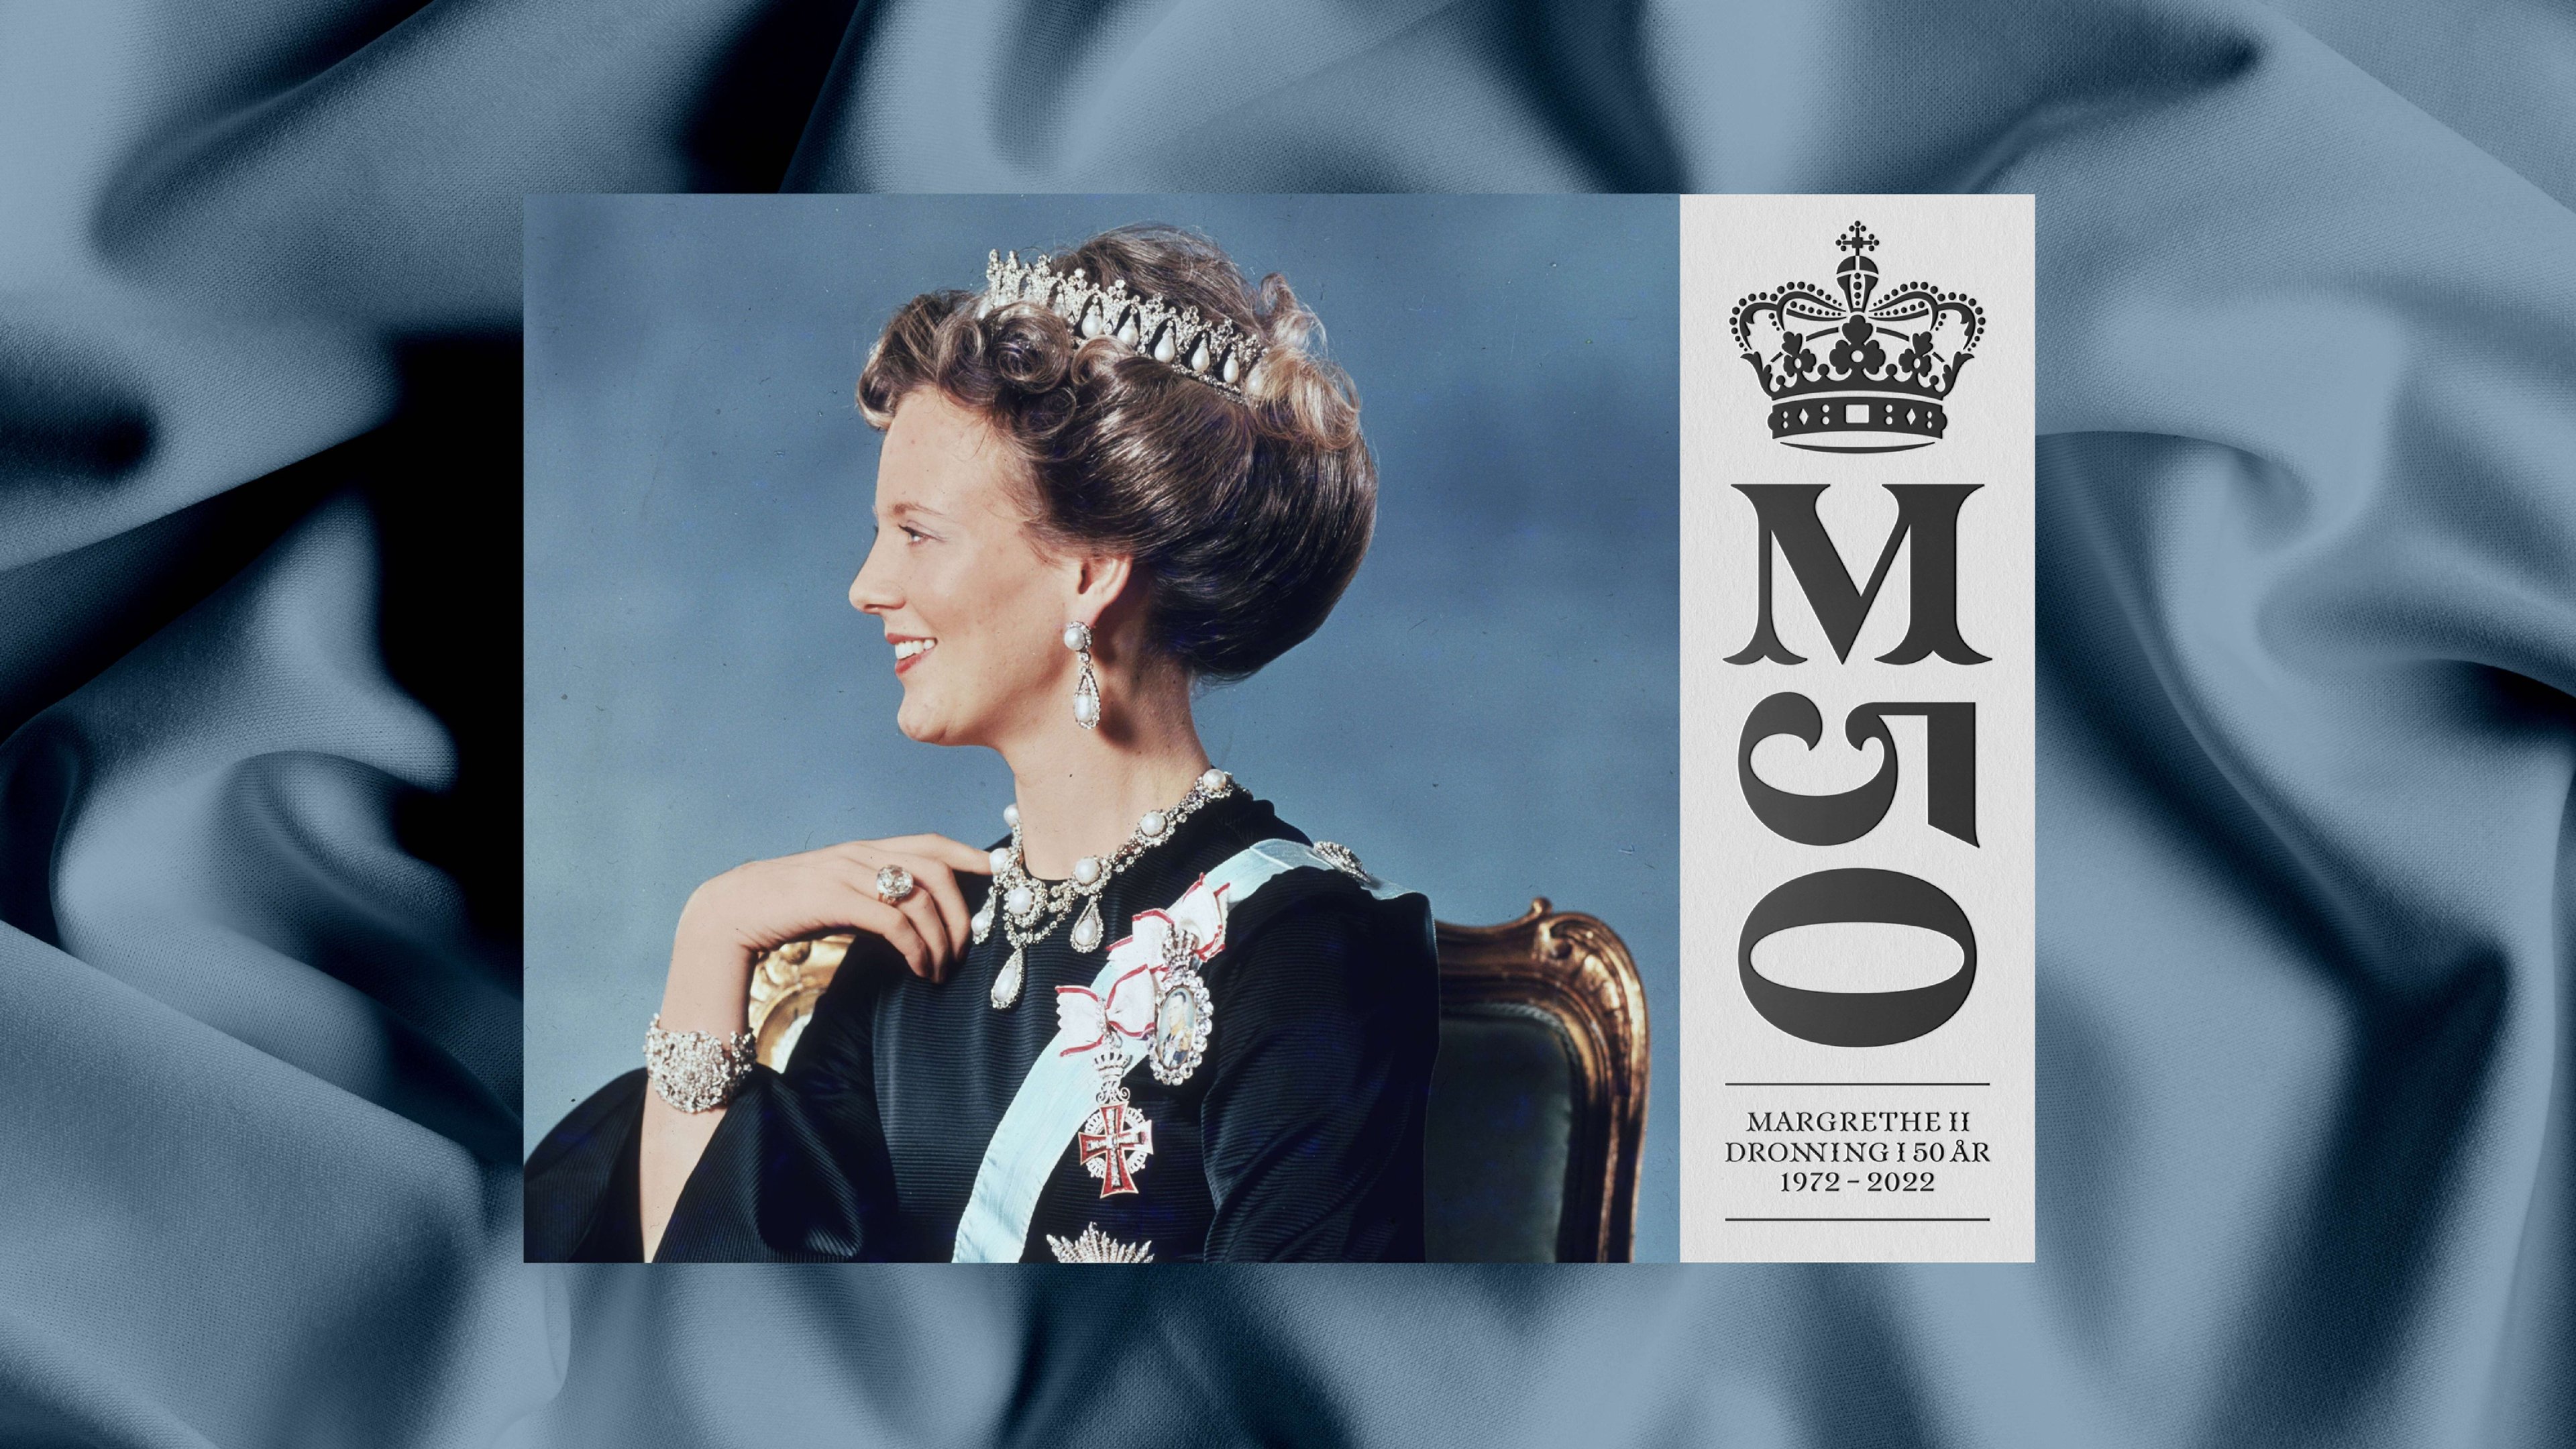 Celebrating 50 years of Her Majesty Queen Margrethe II of Denmark